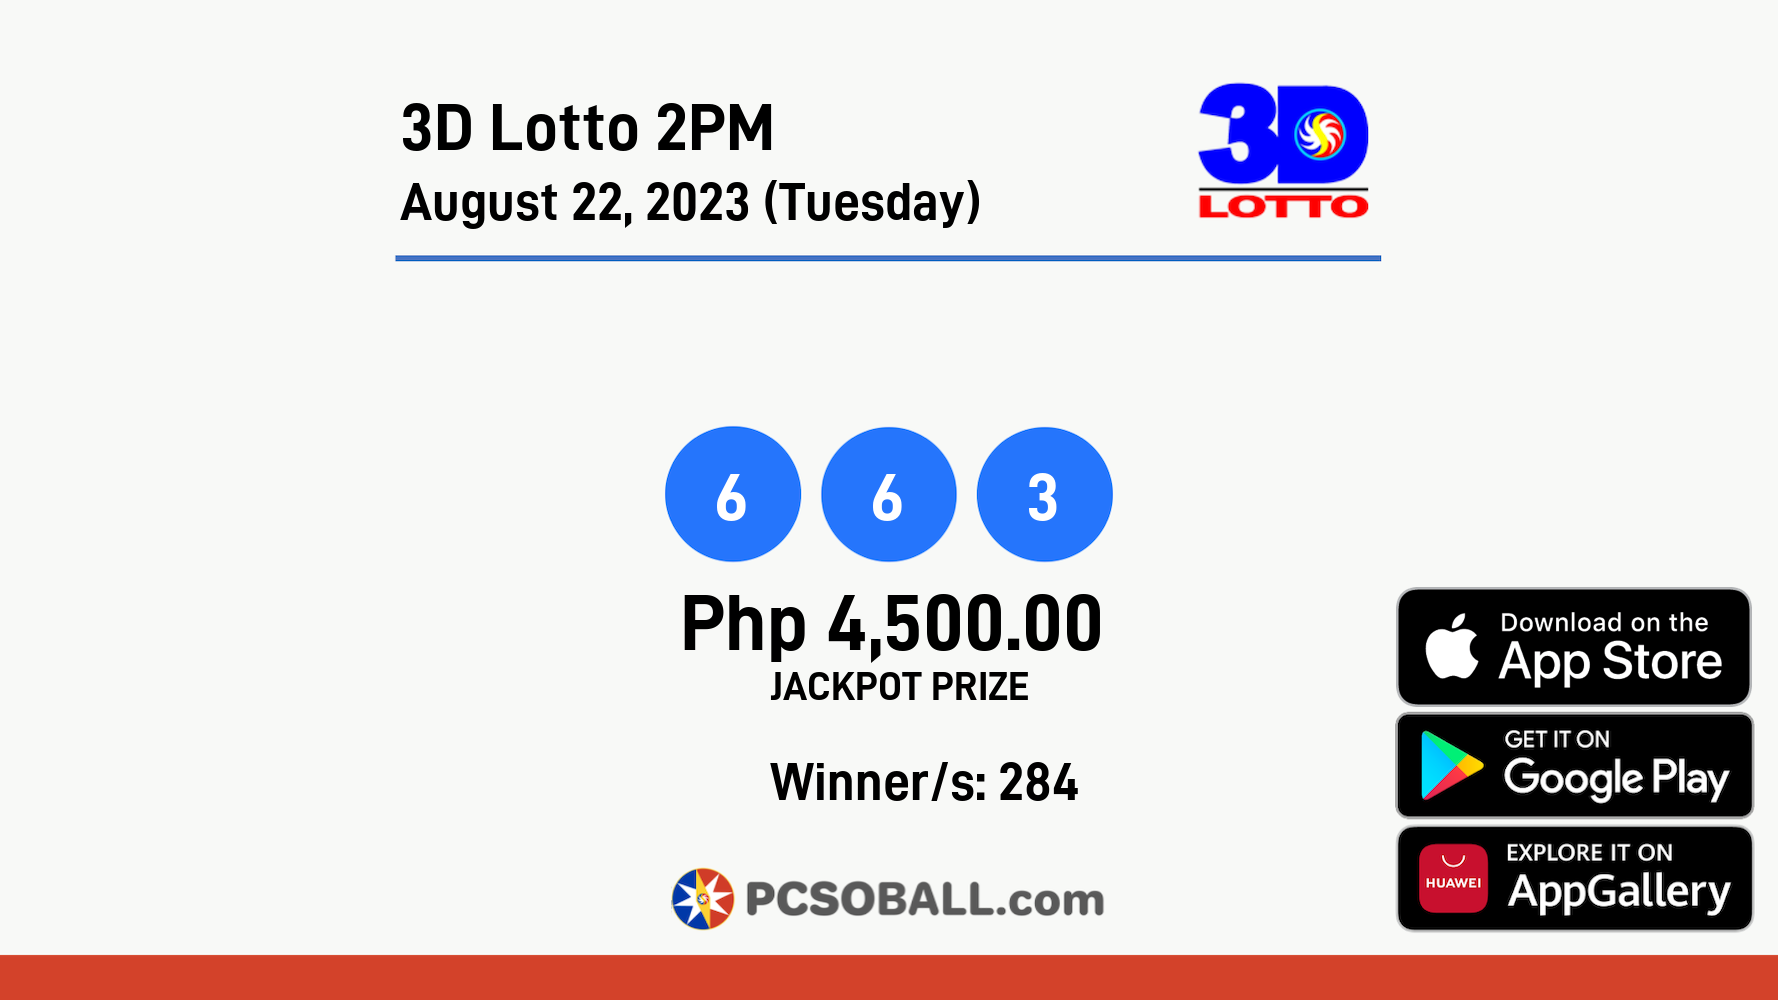 3D Lotto 2PM August 22, 2023 (Tuesday) Result